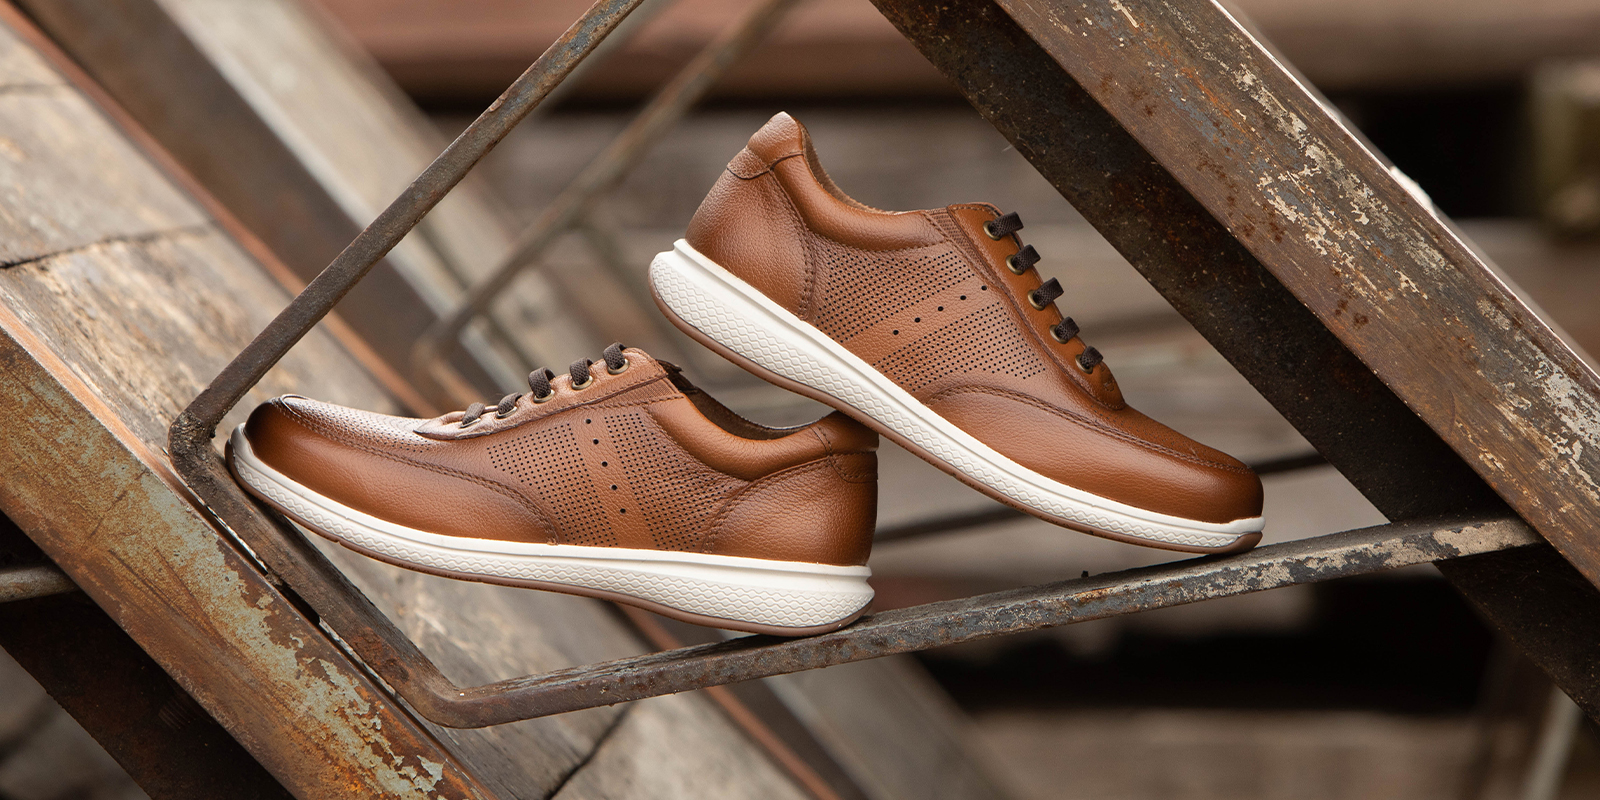 The featured image is the Great Lakes Jr. Sport Oxford in Cognac.